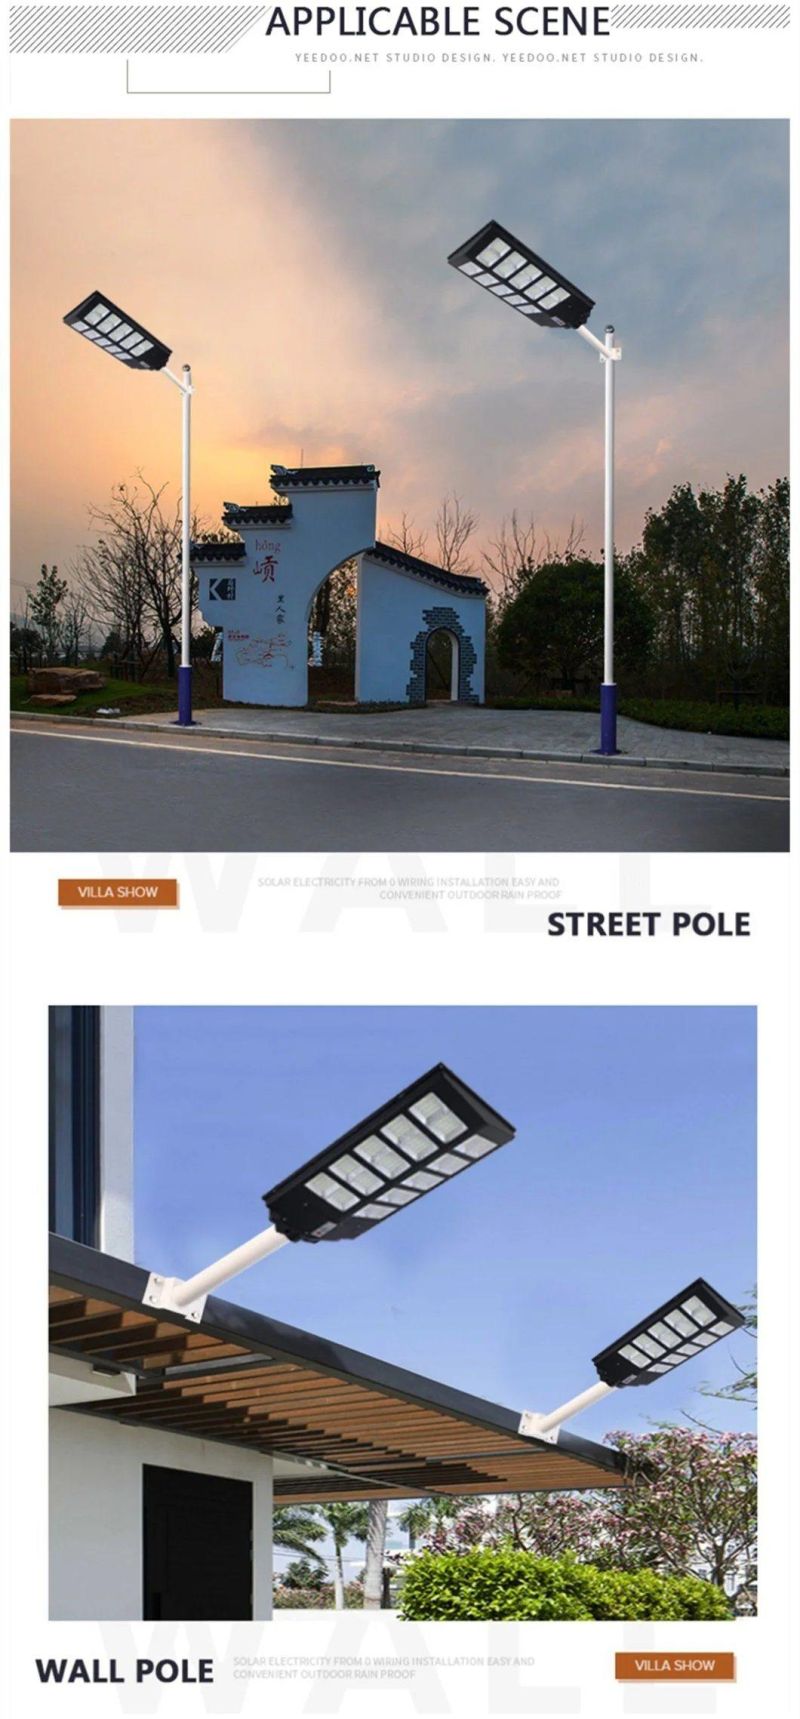 The Factory Wholesale Price (100W 200W) All in One Solar Street Light with Radar Sensor in Guinea Bissau